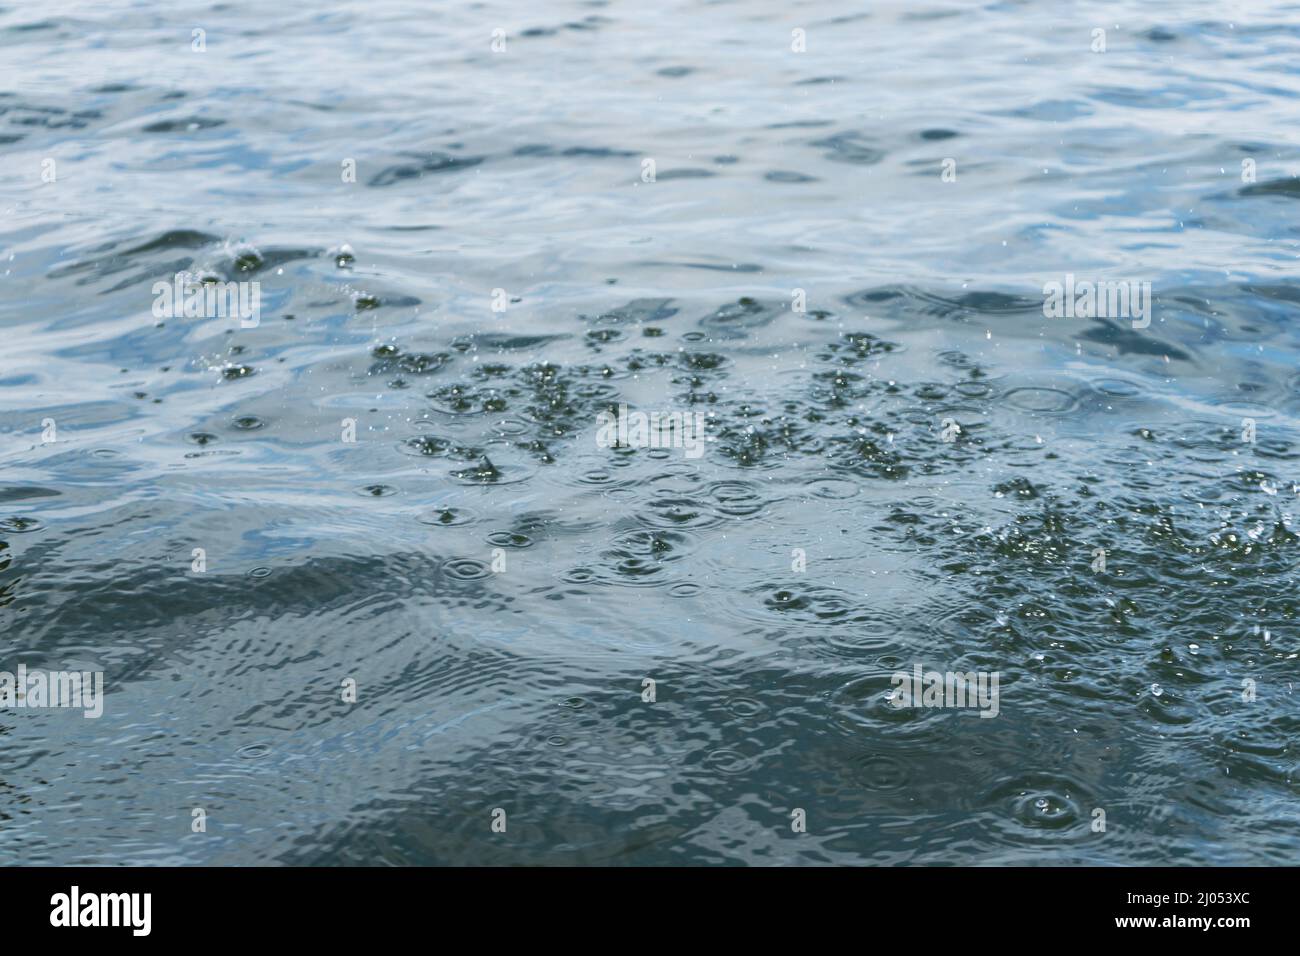 Ripples from rain droplets falling on water surface Stock Photo